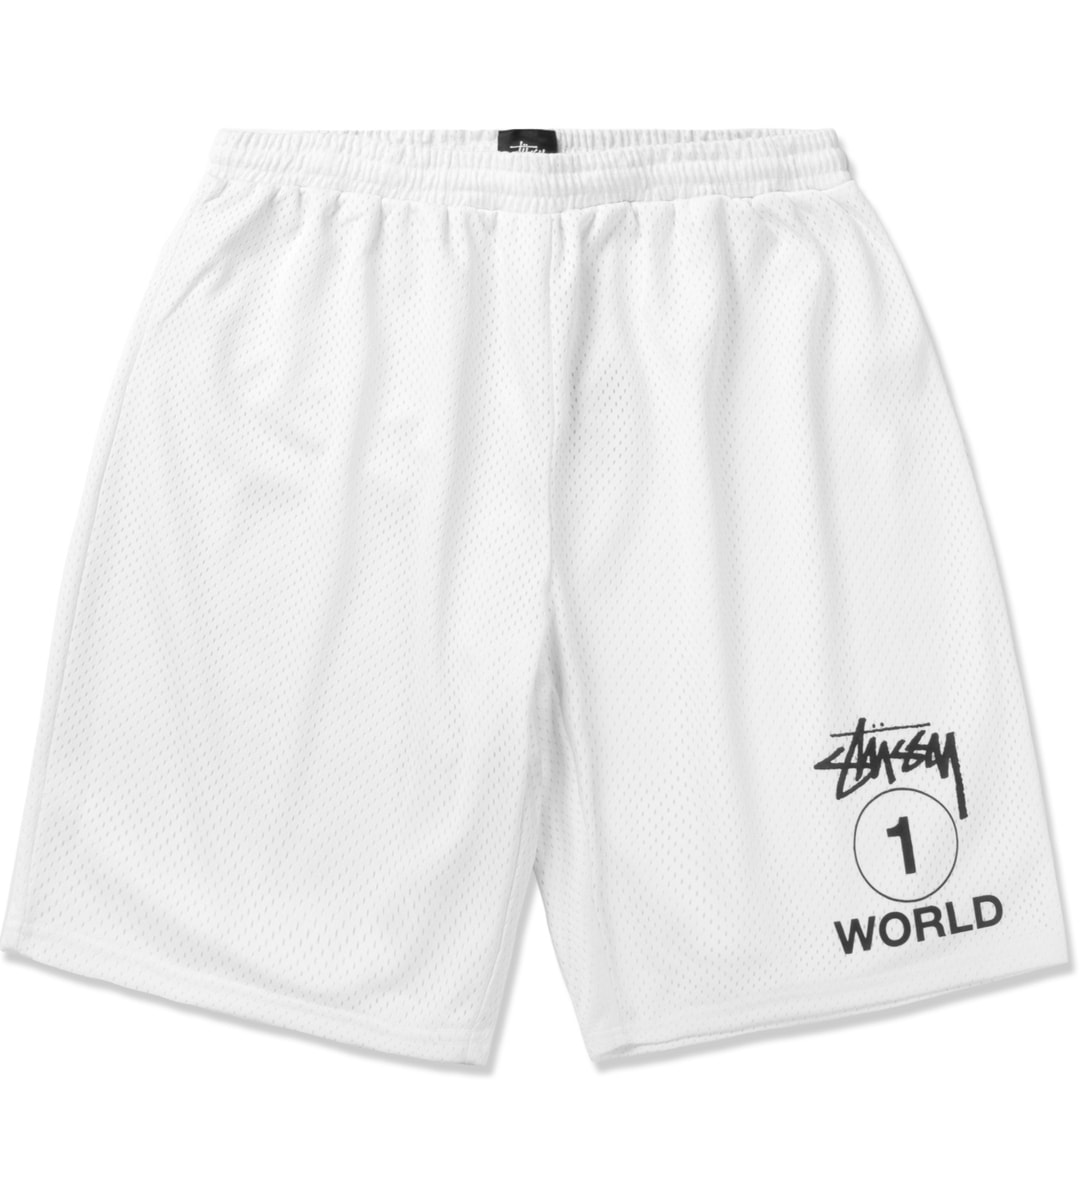 Lifestyle One Stüssy Mesh HBX Fashion Globally | Curated World - by - Shorts White and Hypebeast